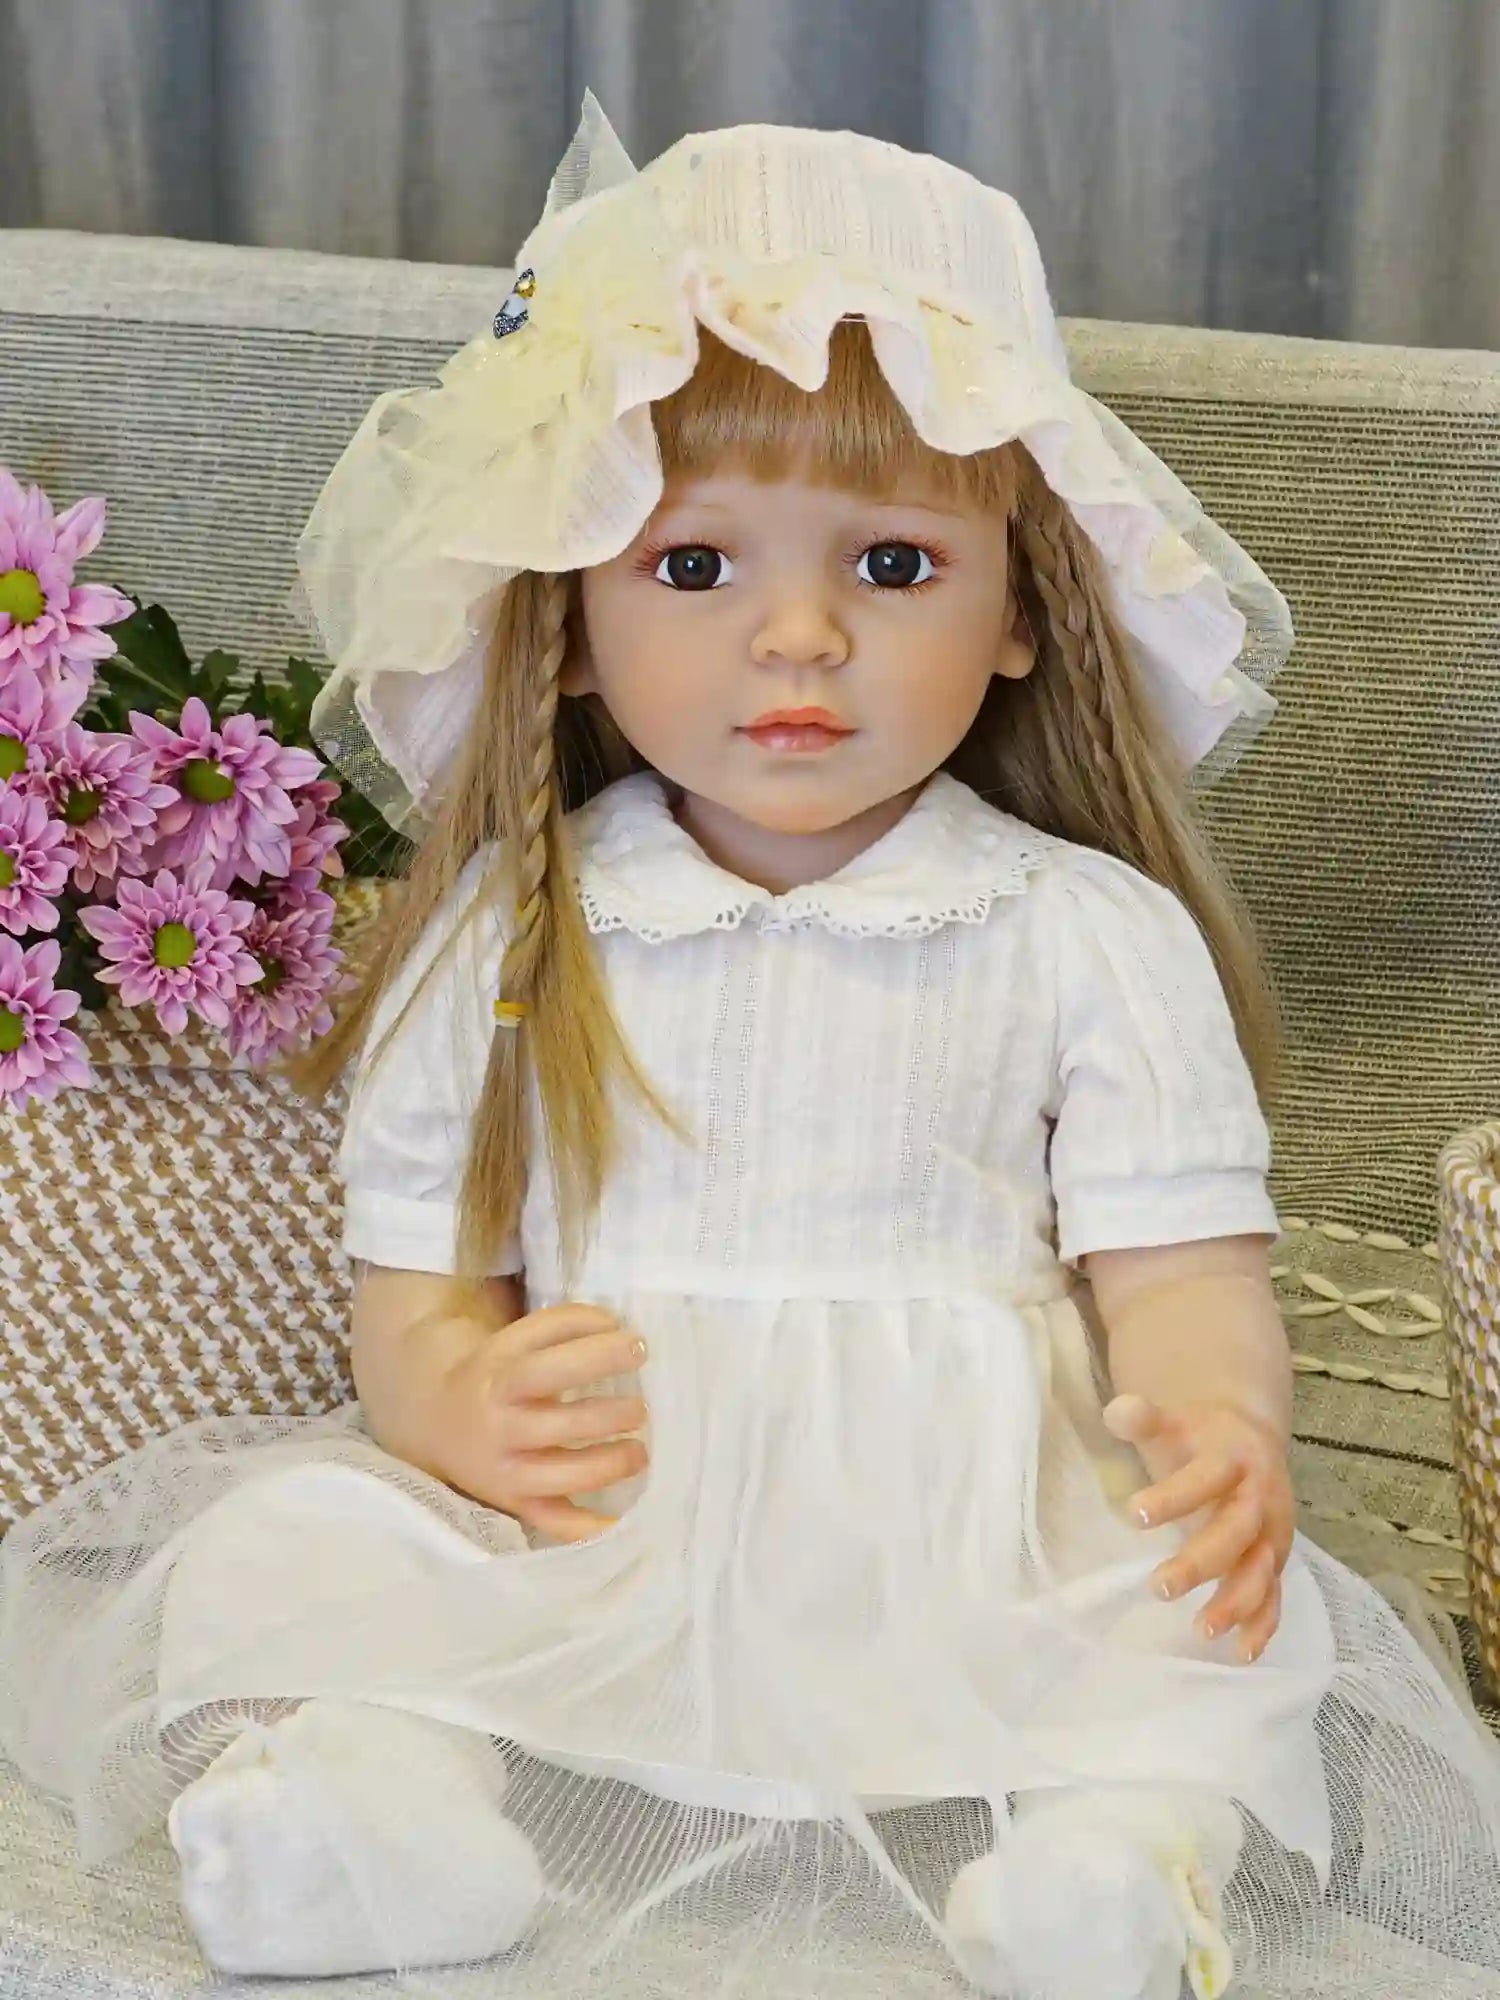 Collectible doll in a sunhat and white dress, seated, with a colorful cushion backdrop.